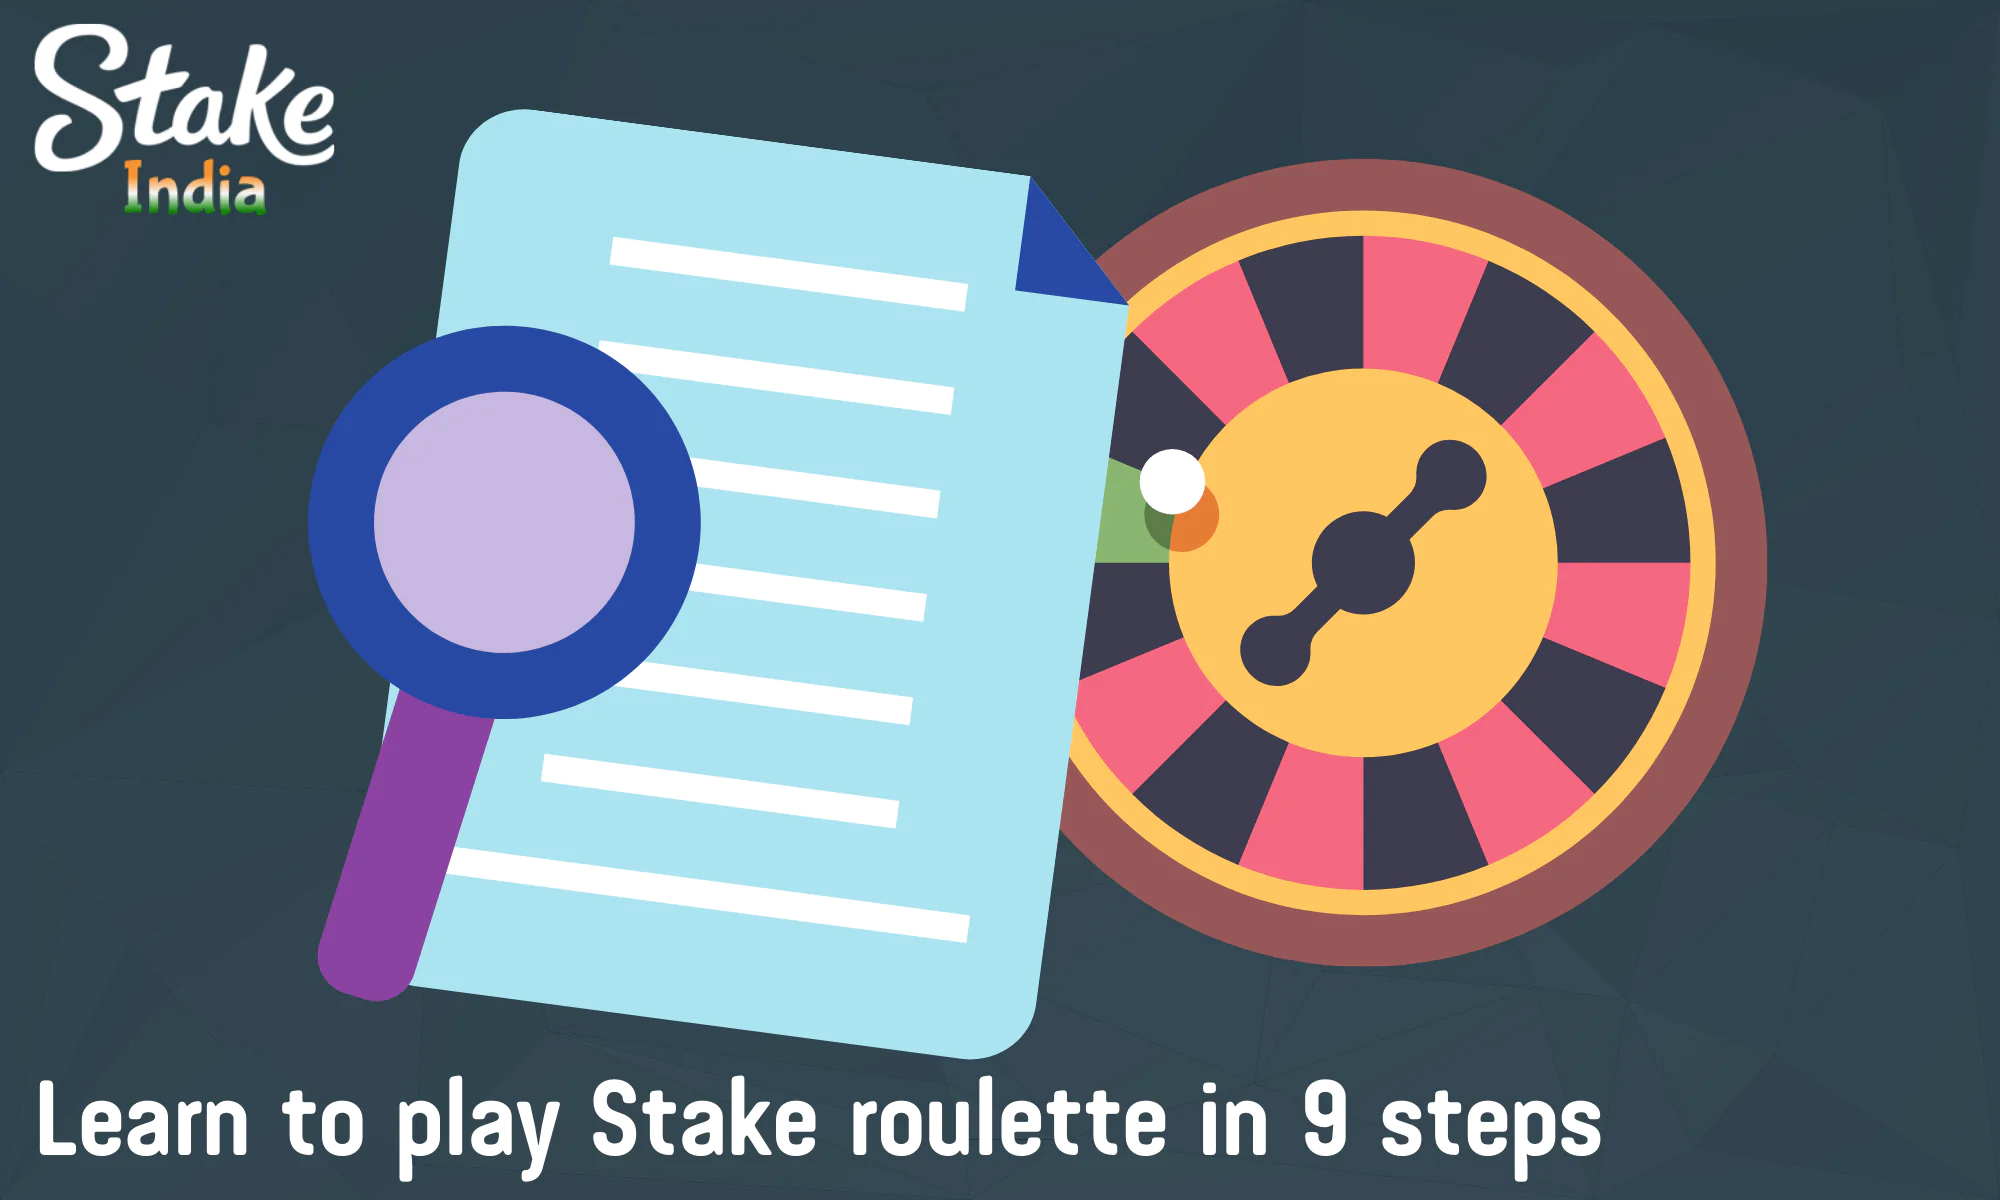 How to learn how to play Stake roulette in 9 steps